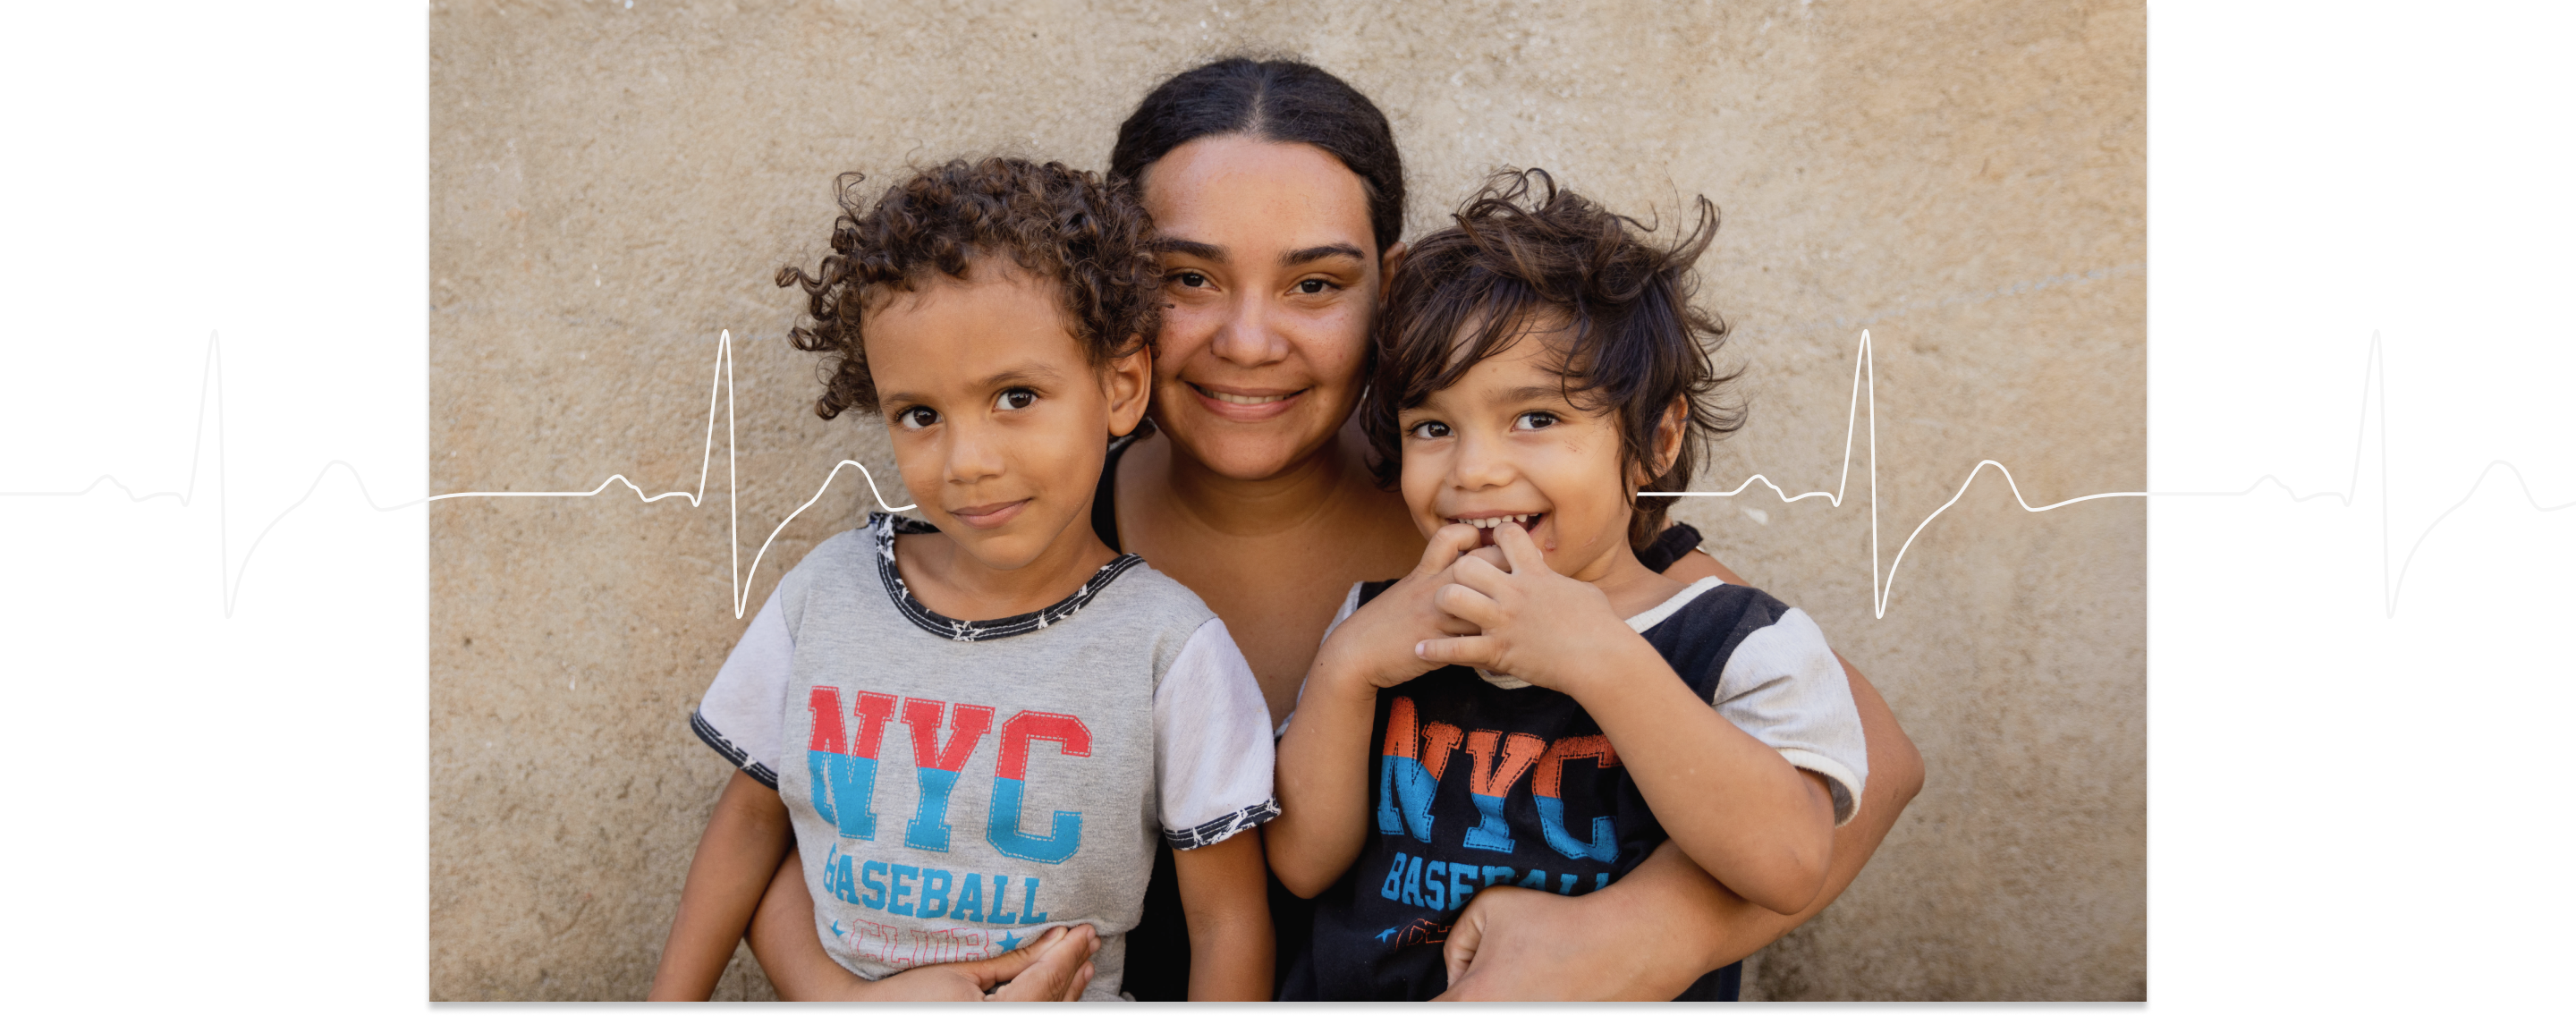 Nelimar and her sons Isaac and Andrew outside their home in Colombia